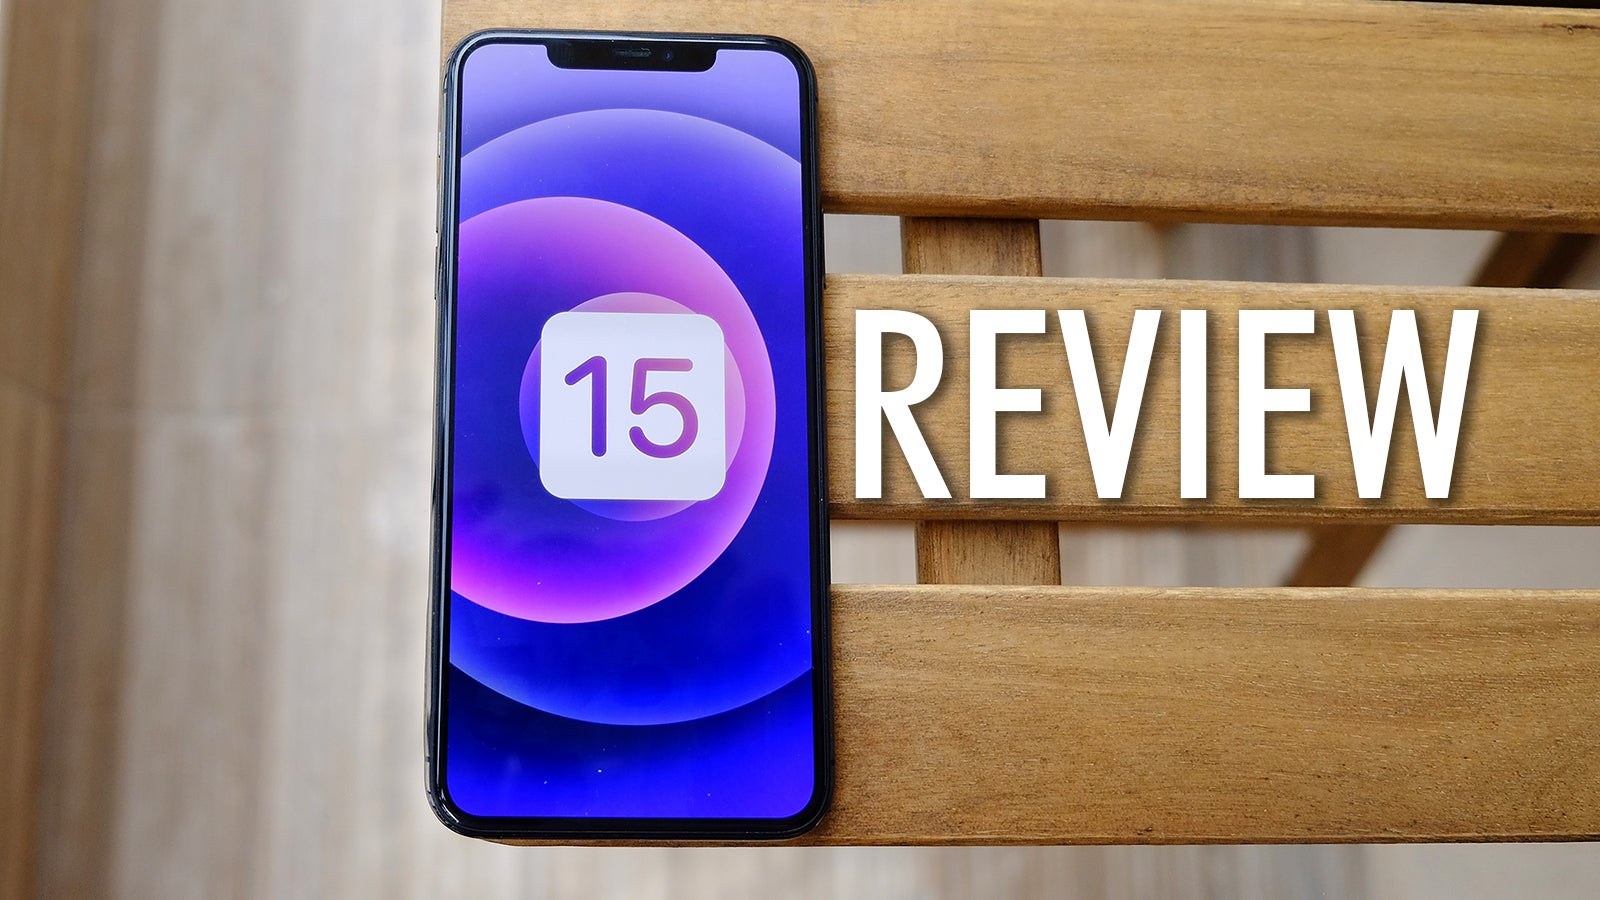 iOS 15: Release date and expected new features - PhoneArena